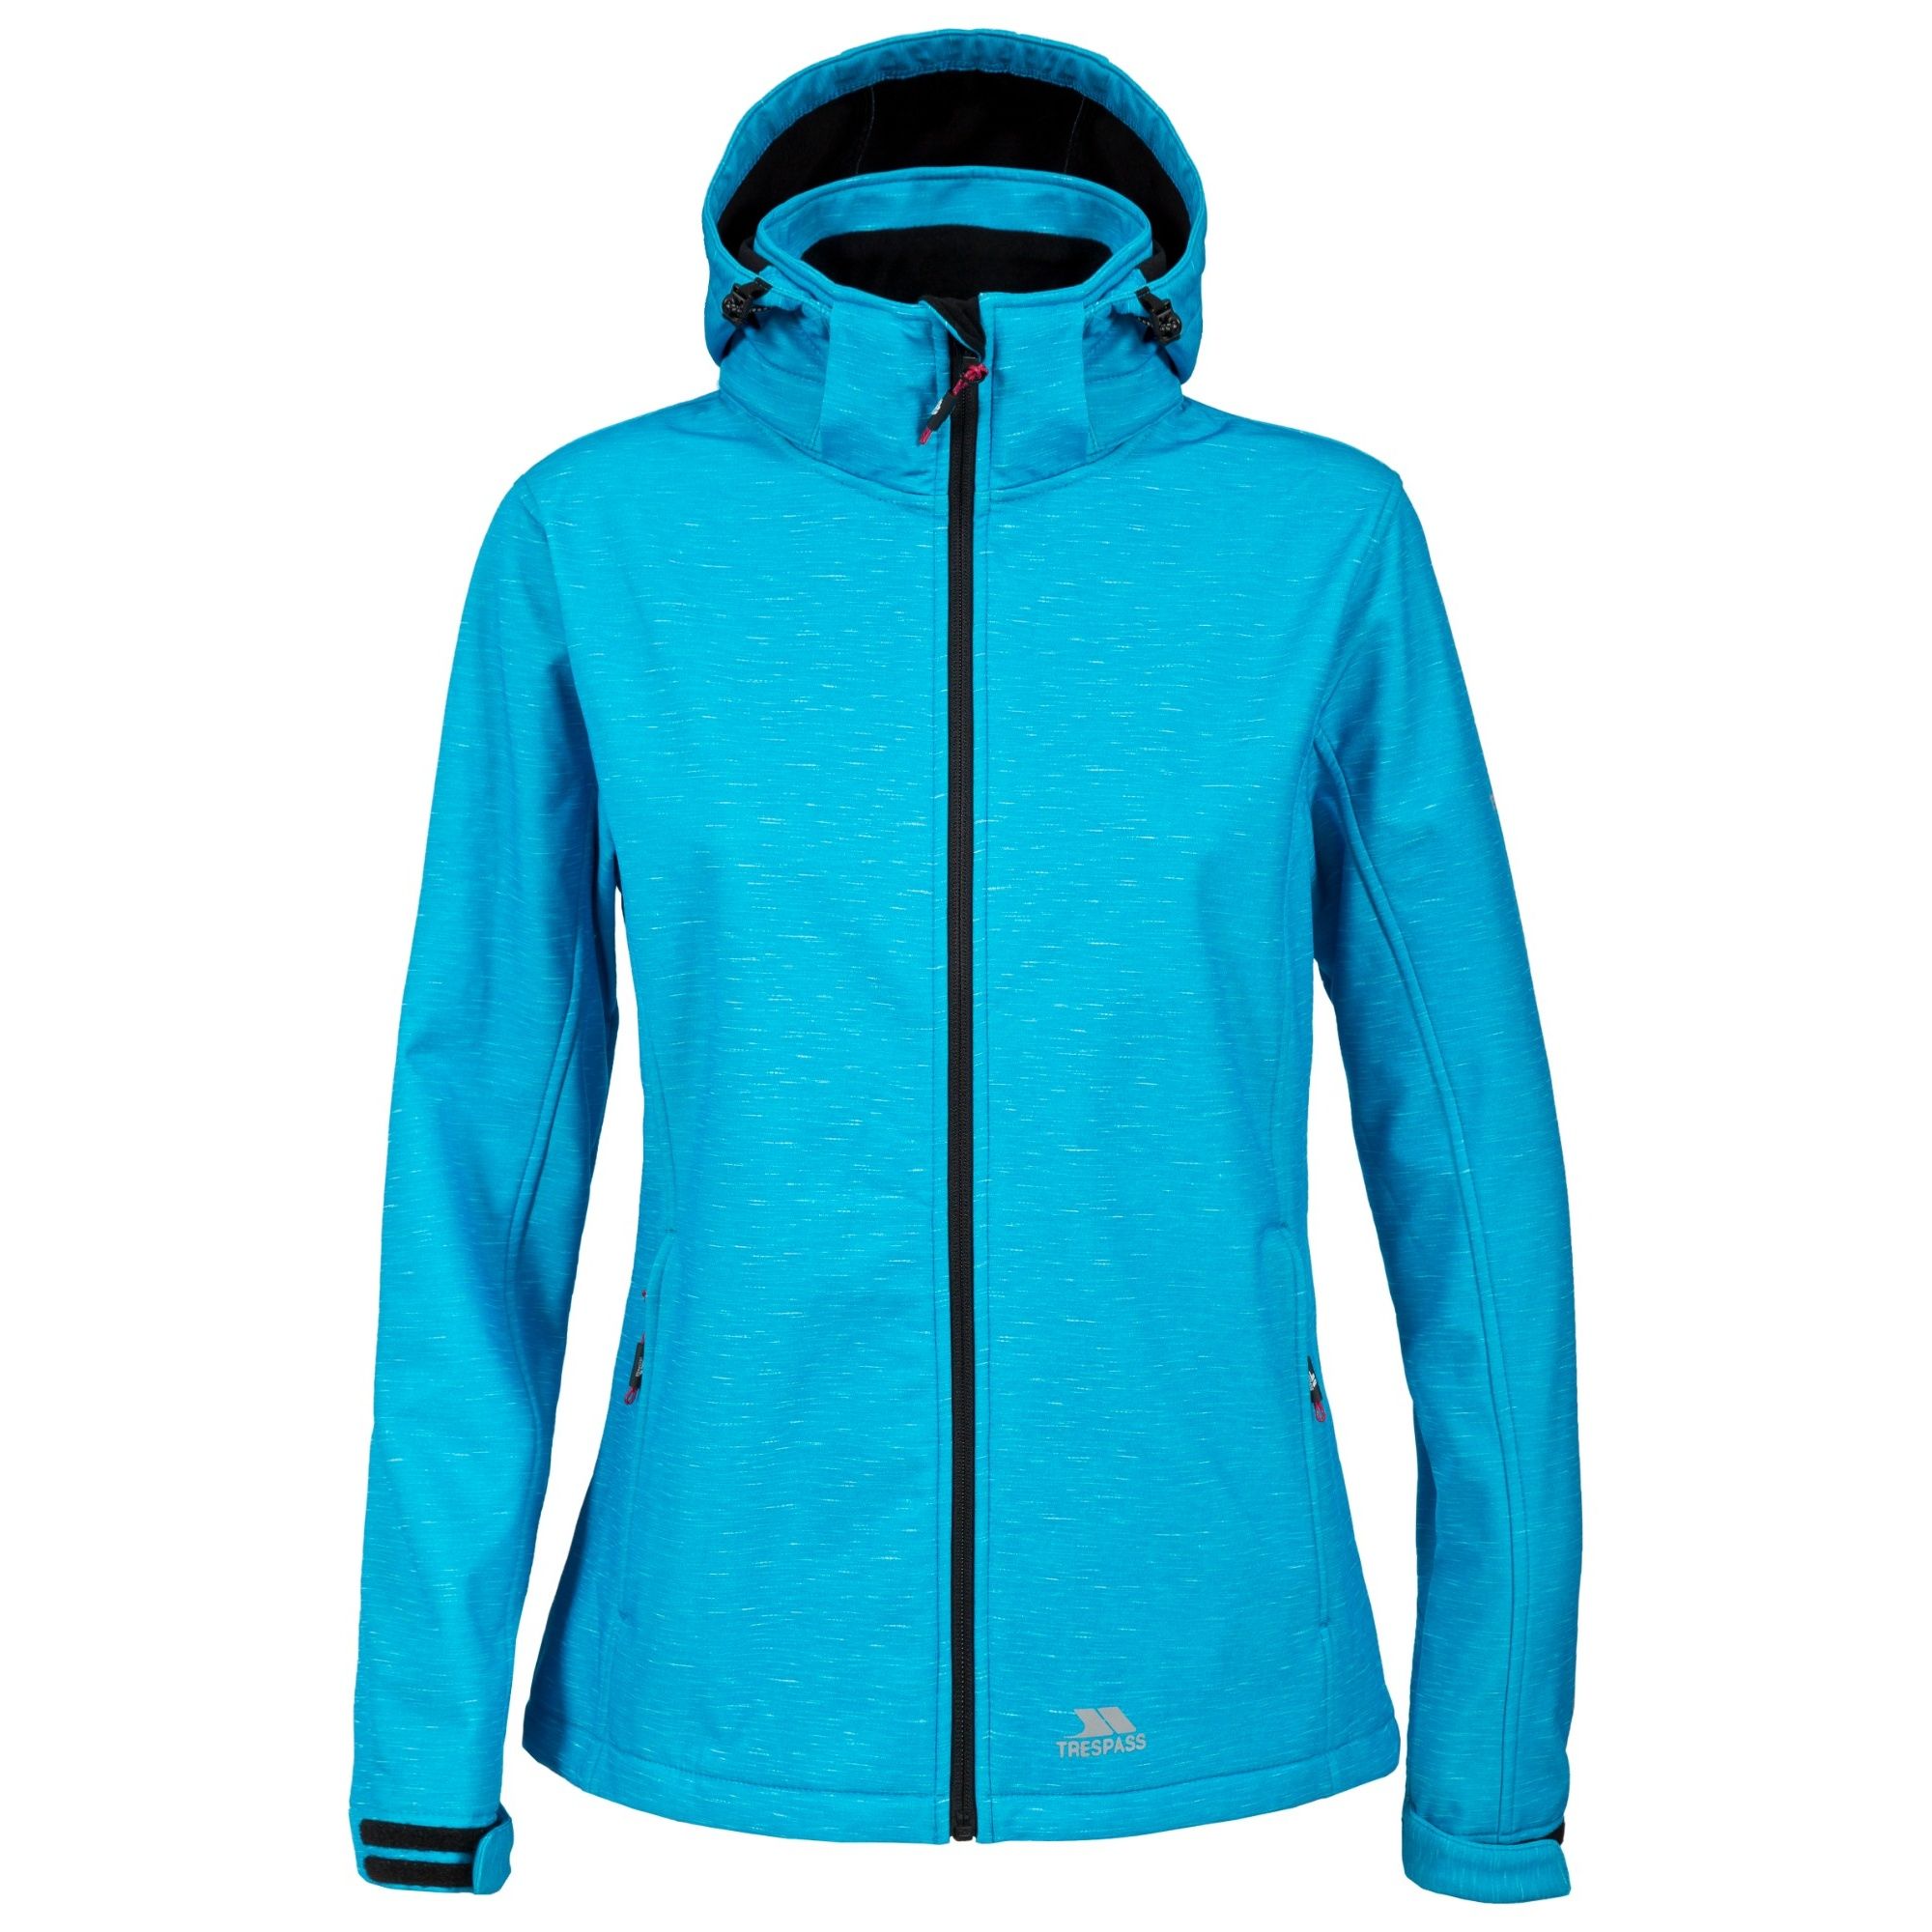 Adjustable zip off hood. 2 zip pockets. Chin guard. Flat cuff with touch fastening tab. Drawcord at hem. Contrast fabric backing. Waterproof 3000mm, breathable 3000mm, windproof. 95% Polyester, 5% Elastane. TPU membrane. Trespass Womens Chest Sizing (approx): XS/8 - 32in/81cm, S/10 - 34in/86cm, M/12 - 36in/91.4cm, L/14 - 38in/96.5cm, XL/16 - 40in/101.5cm, XXL/18 - 42in/106.5cm.